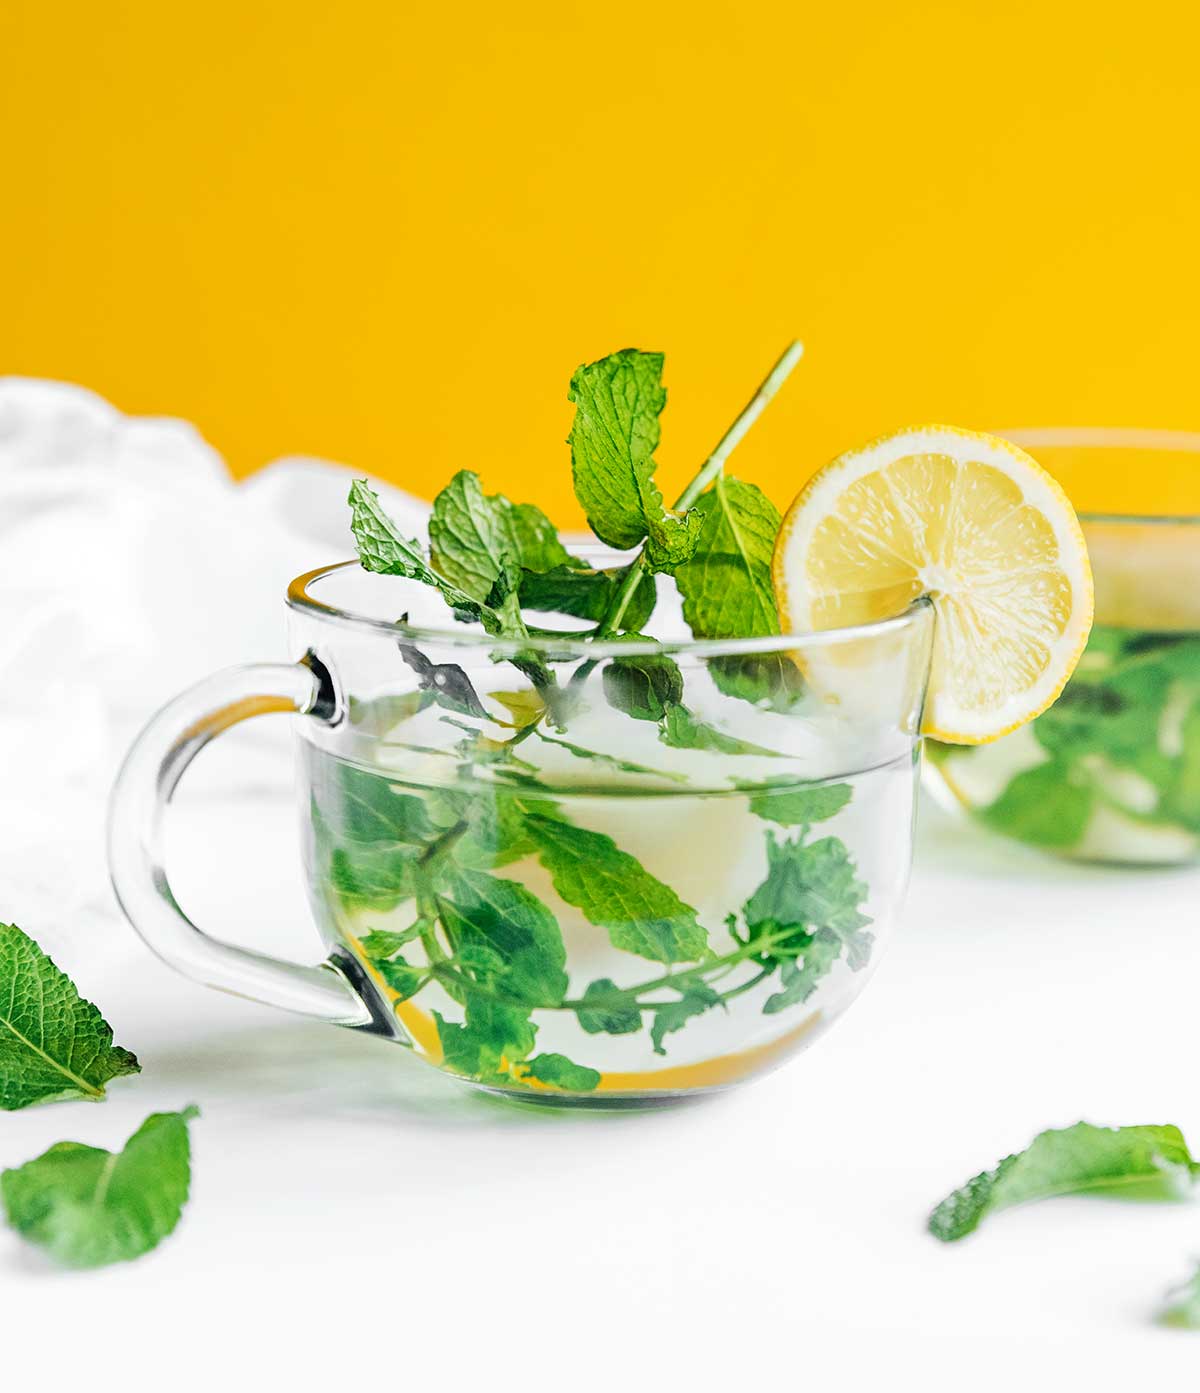 Fresh mint tea in a clear glass with a lemon